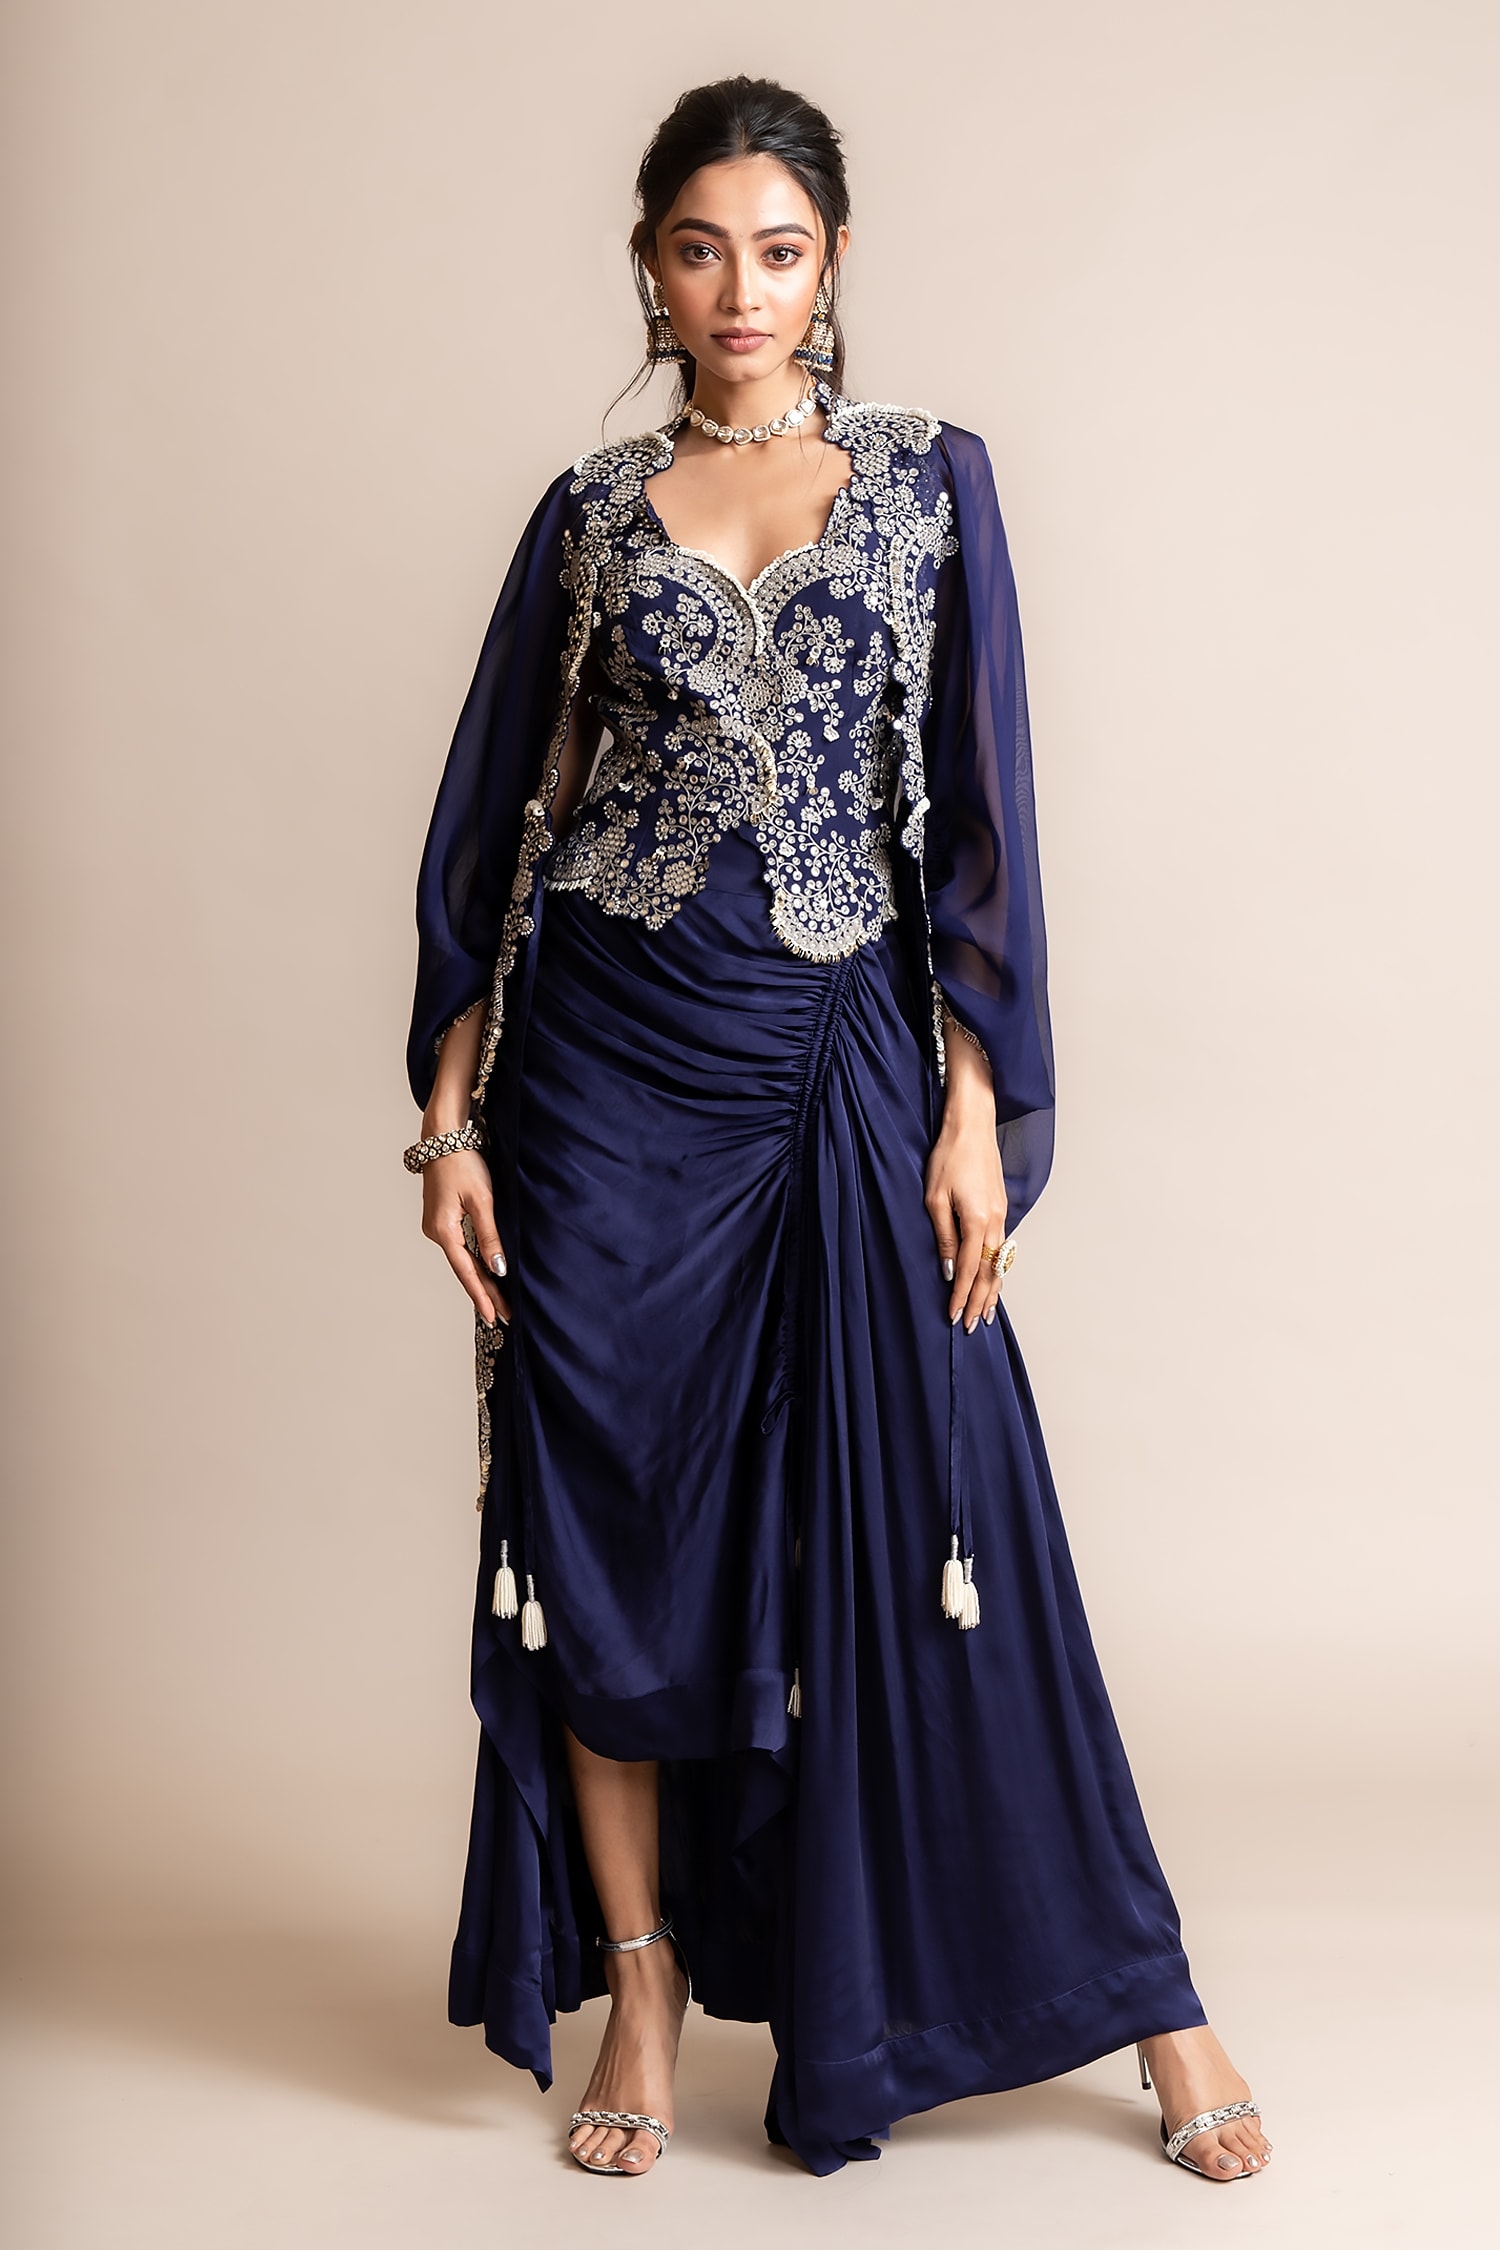 Buy Blue Chiffon Mirror Work Cape with Skirt and Bralette by Designer PUNIT  BALANA Online at